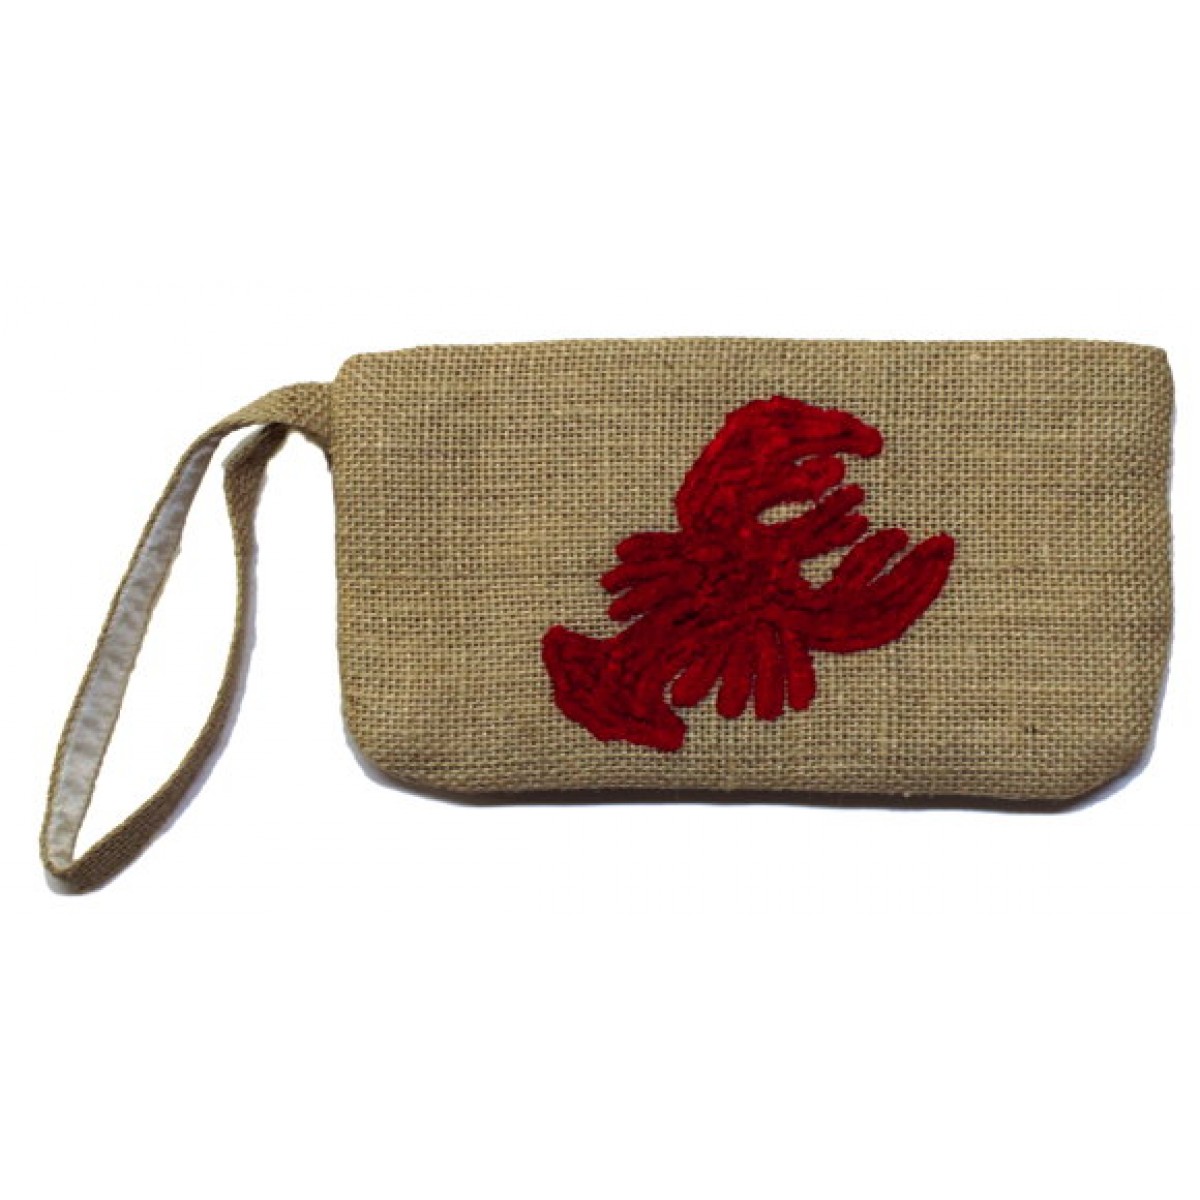 Wristlet with Lobster